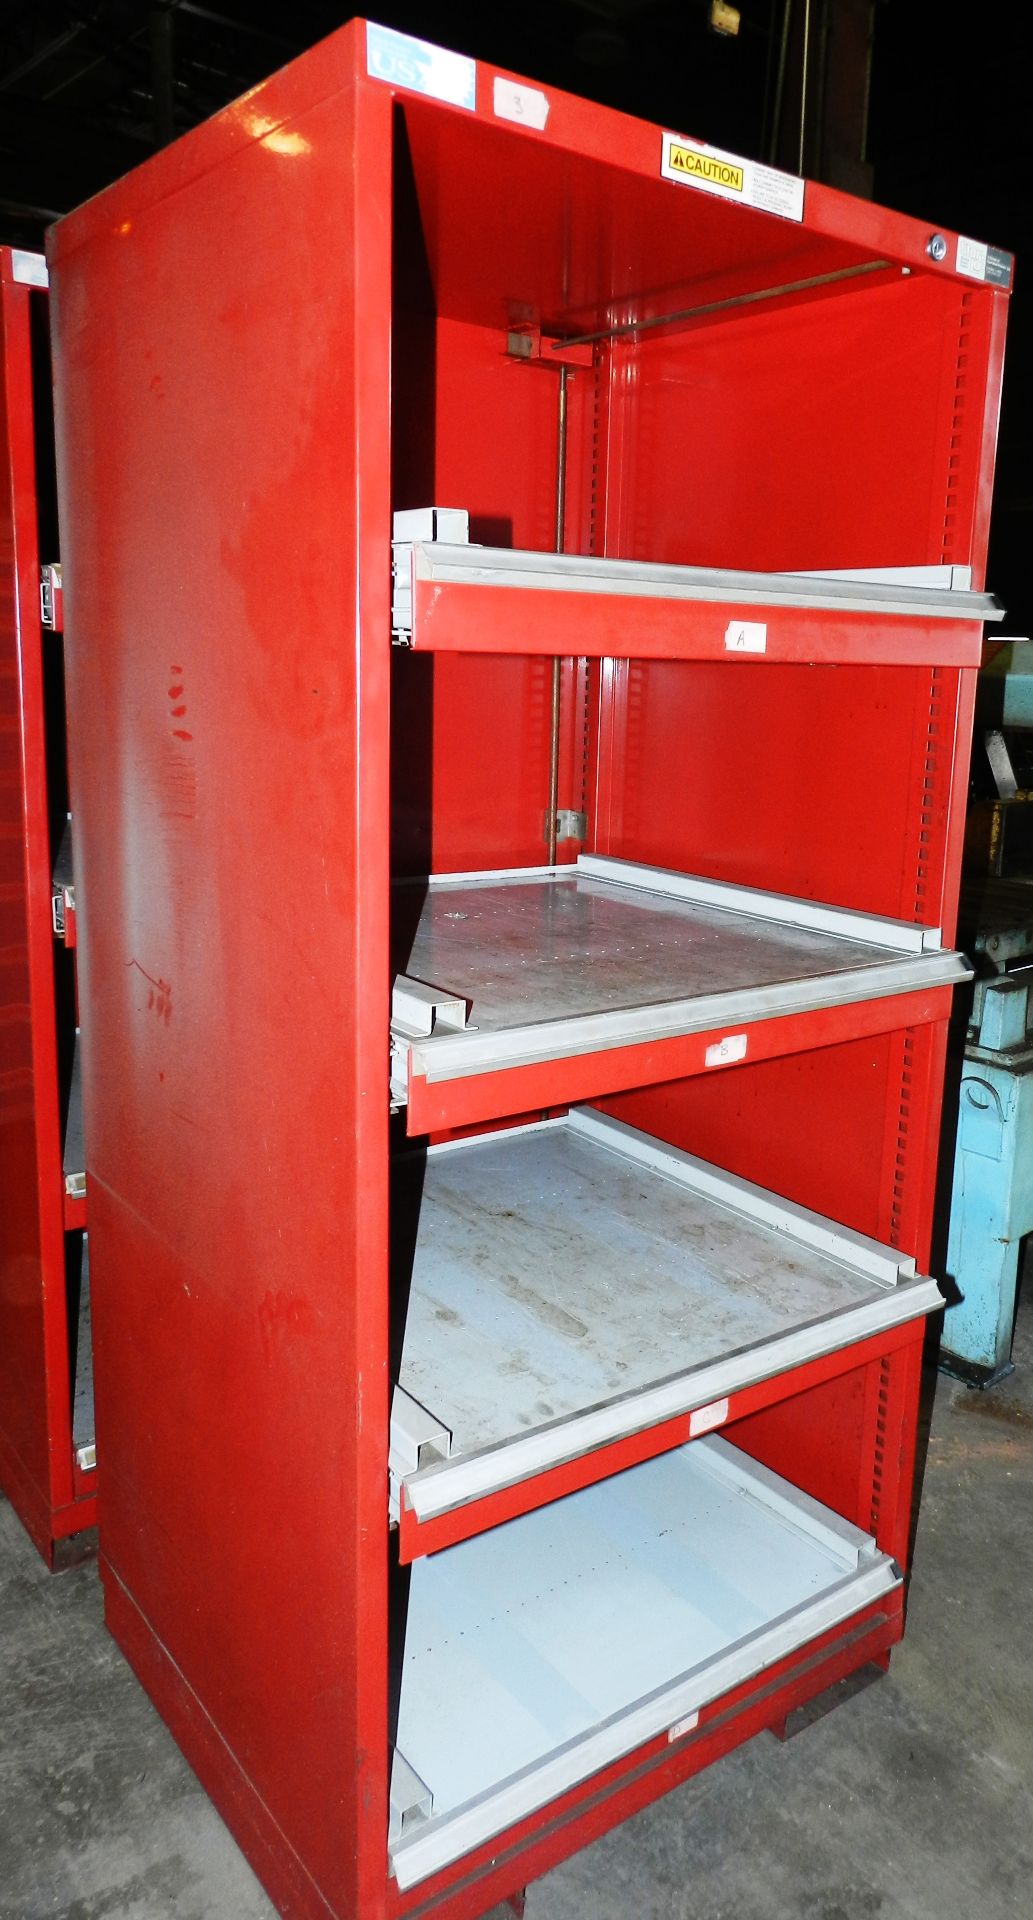 Stor-Loc Modular Drawer System 29" x 28" x 65.5" Tool Cabinet - Image 2 of 4